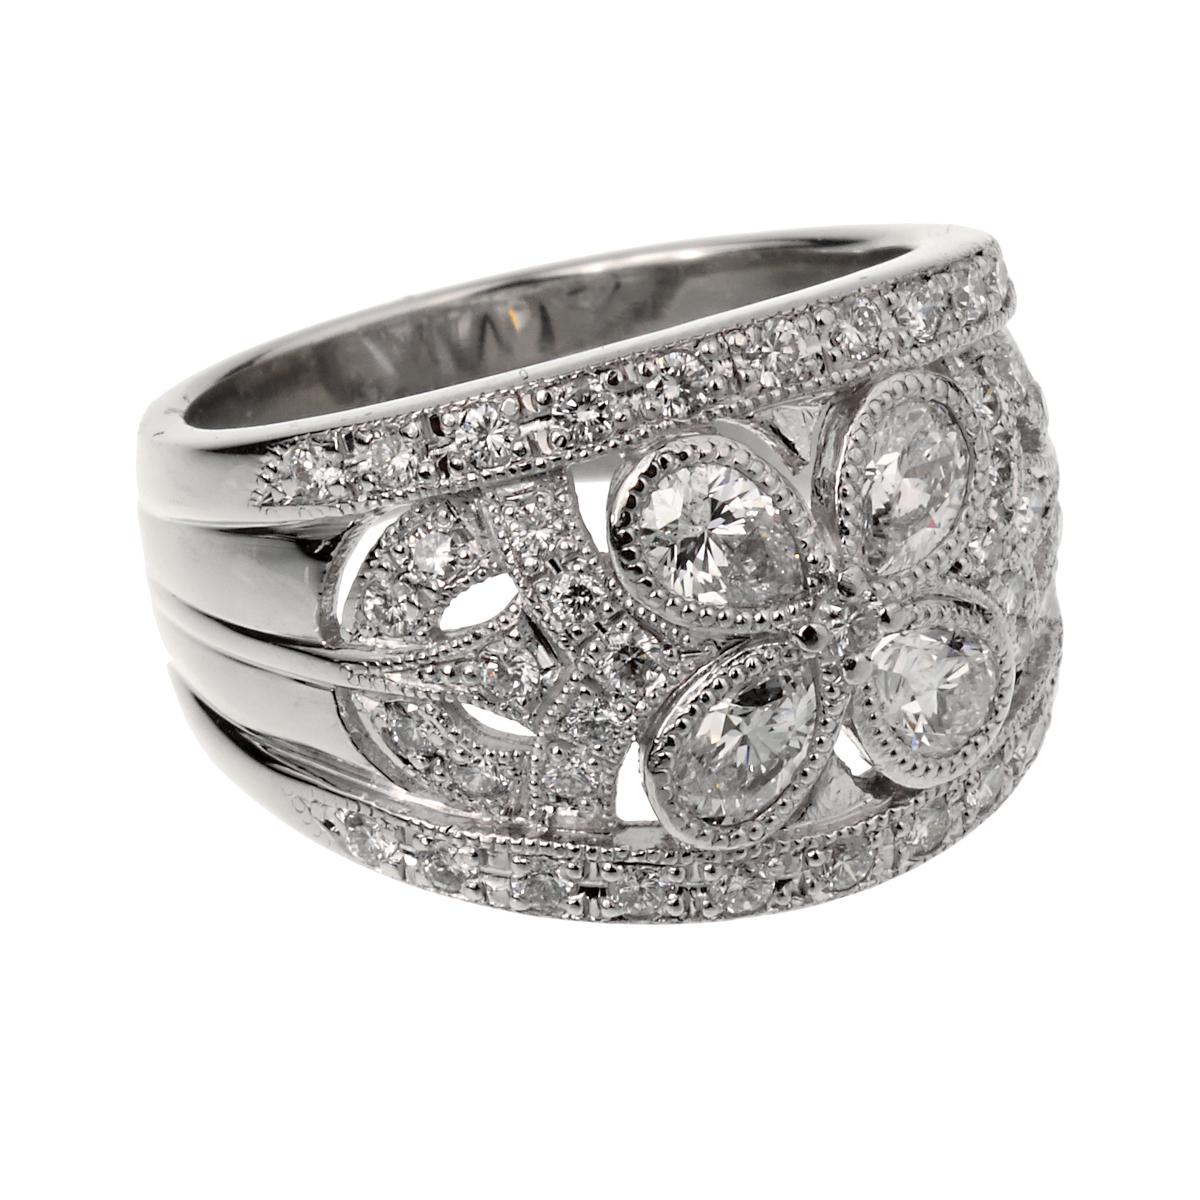 A fabulous vintage cocktail ring showcasing 4 pear shaped diamonds adorned with round brilliant cut diamonds in shimmering platinum. The ring measures a size 6 1/4 and can be resized.